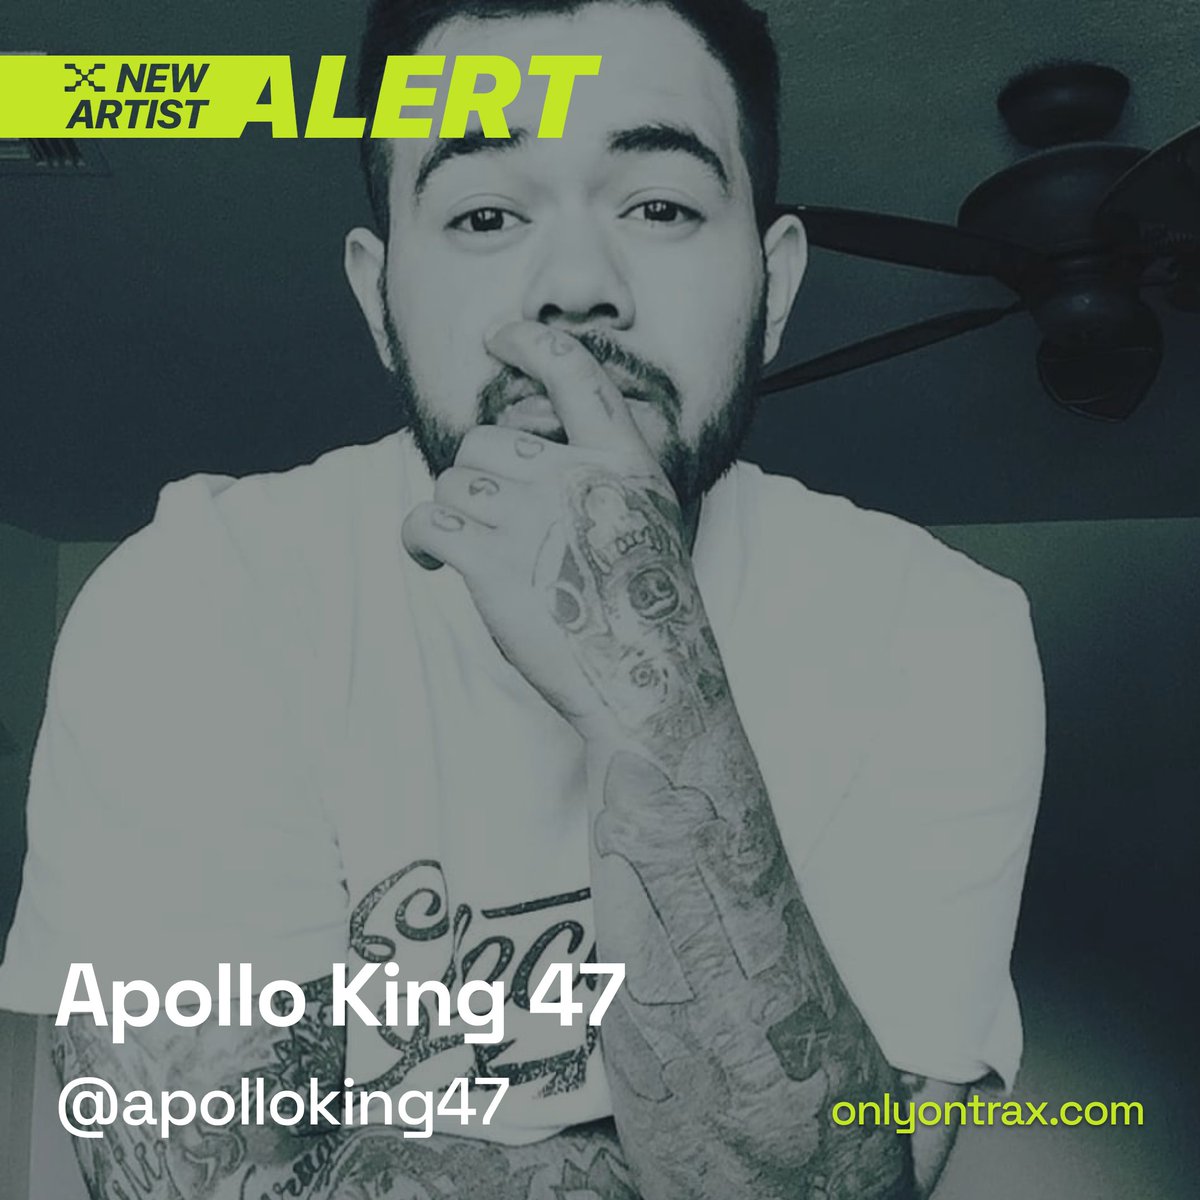 Apollo King 47 (@realapolloking) is a Mexican bilingual rapper and singer. 🇲🇽🤟

We’re proud that he is bringing his bag of musical production and awesome guitar skills to @onlyontrax! 🚀

Make sure to check out covers and original tracks here:

➡️soundcloud.com/hache-3